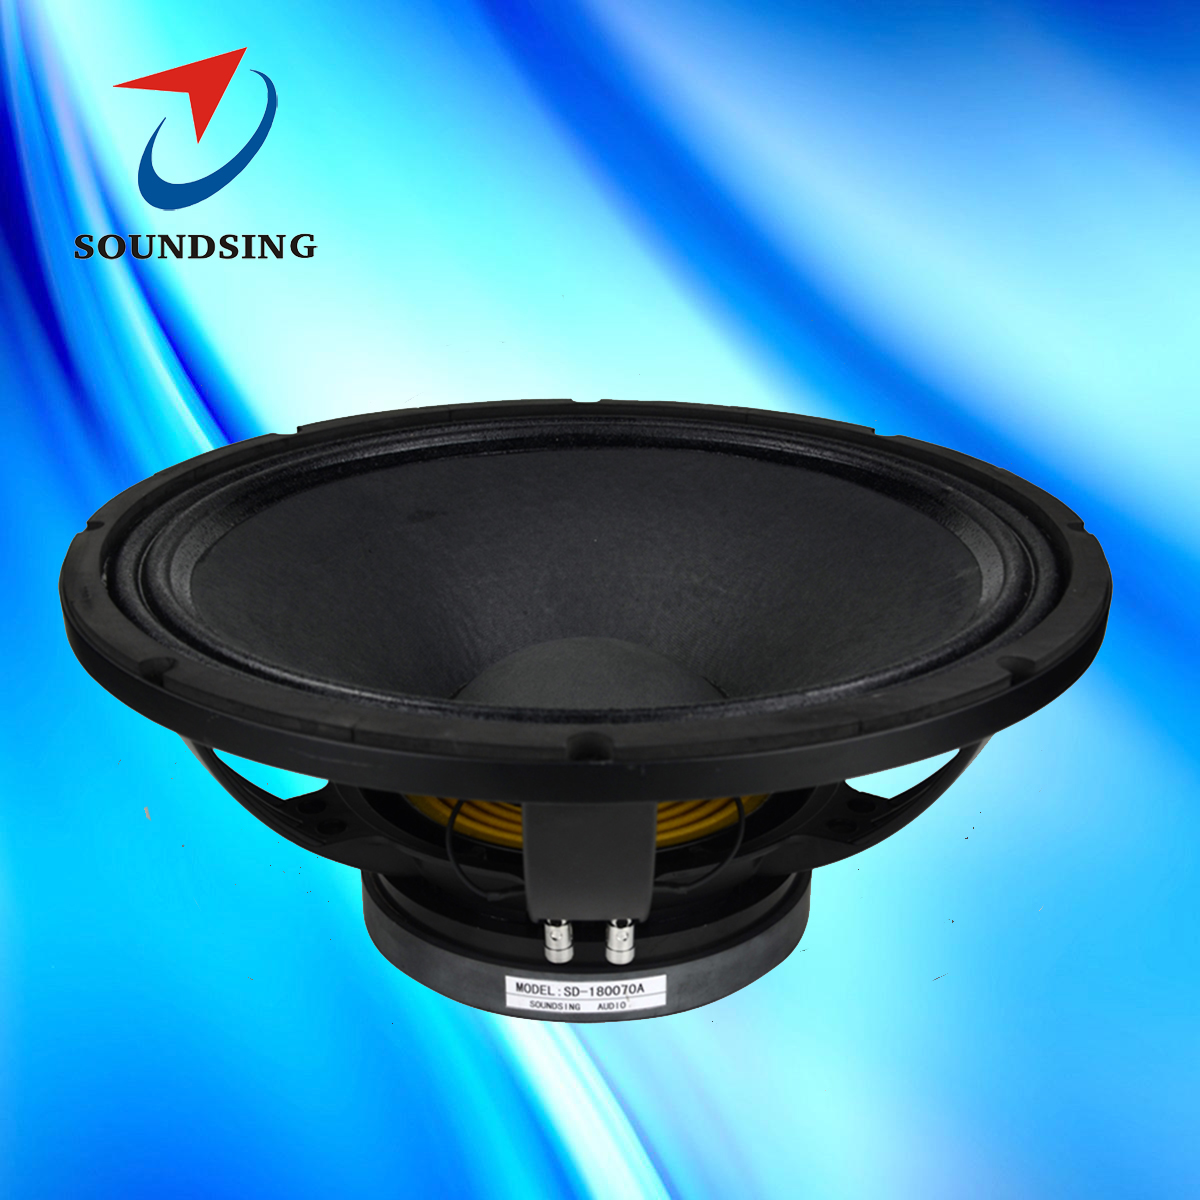 Stage powered speakers 18 inch SD-180070A